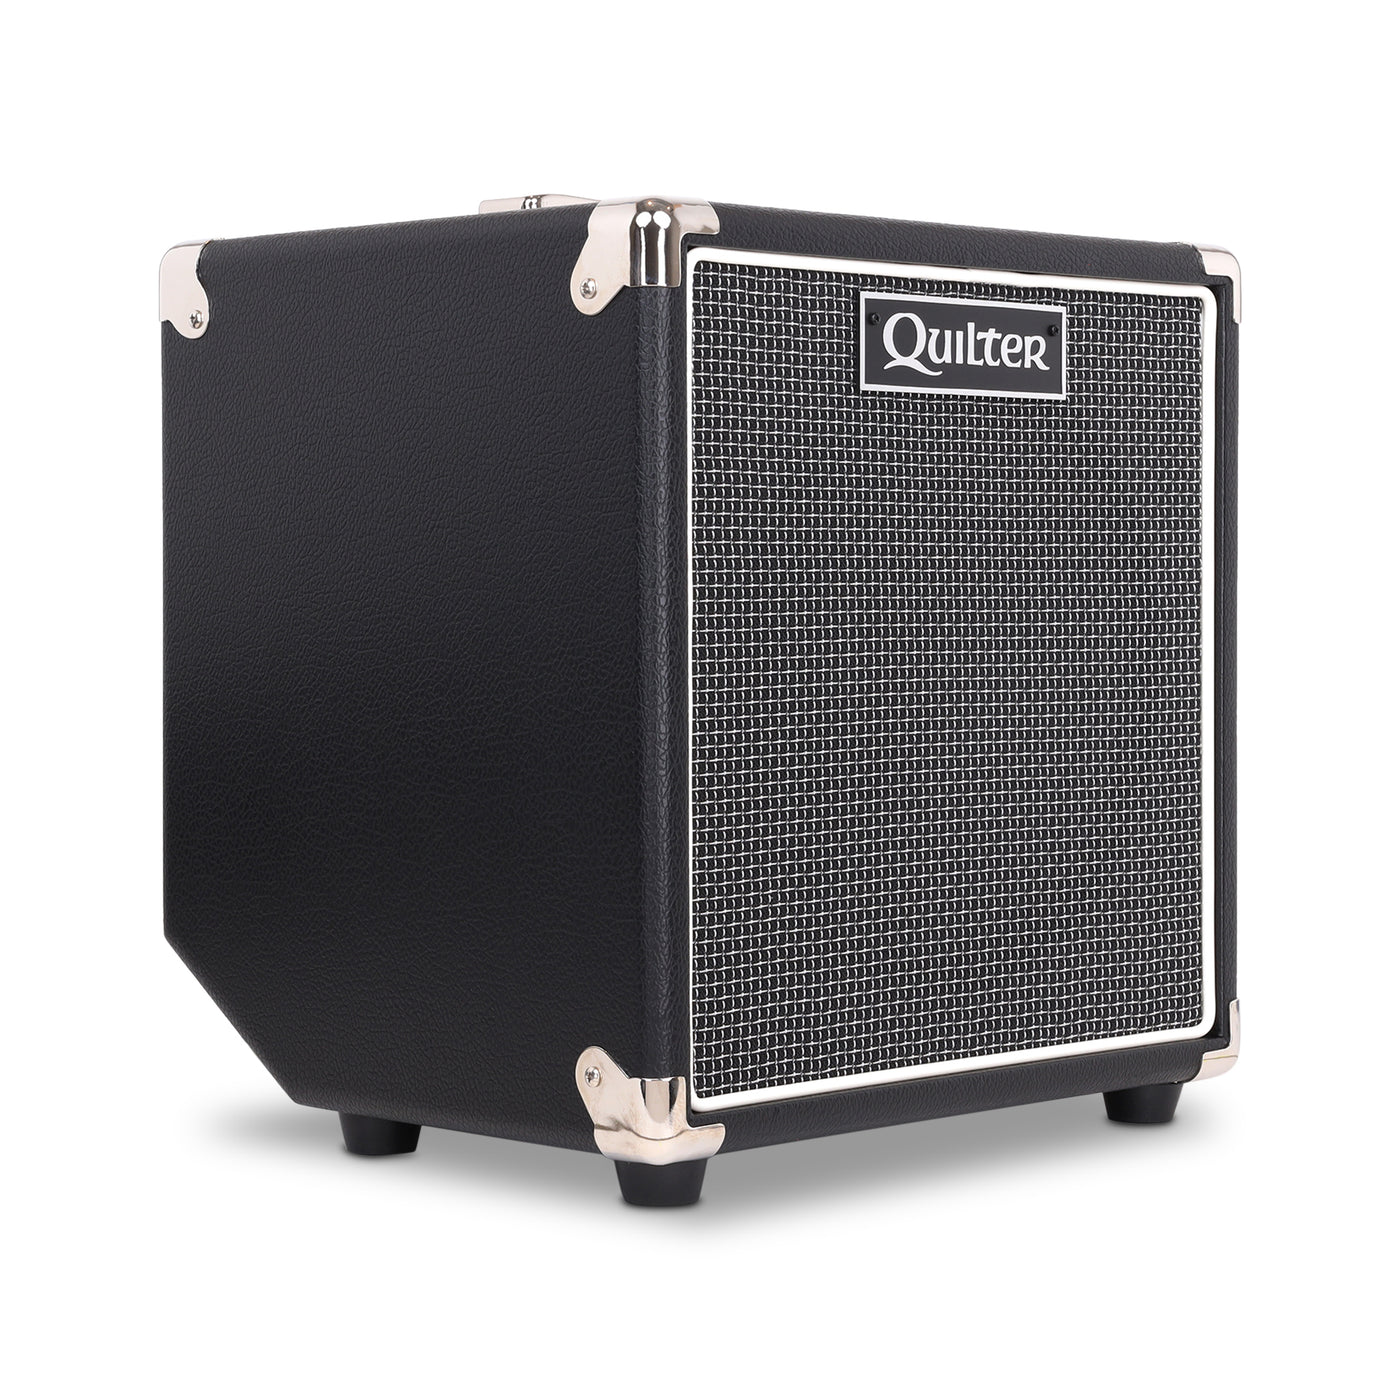 Quilter Labs BlockDock 10TC amplifier cabinet - facing diagonally to the right